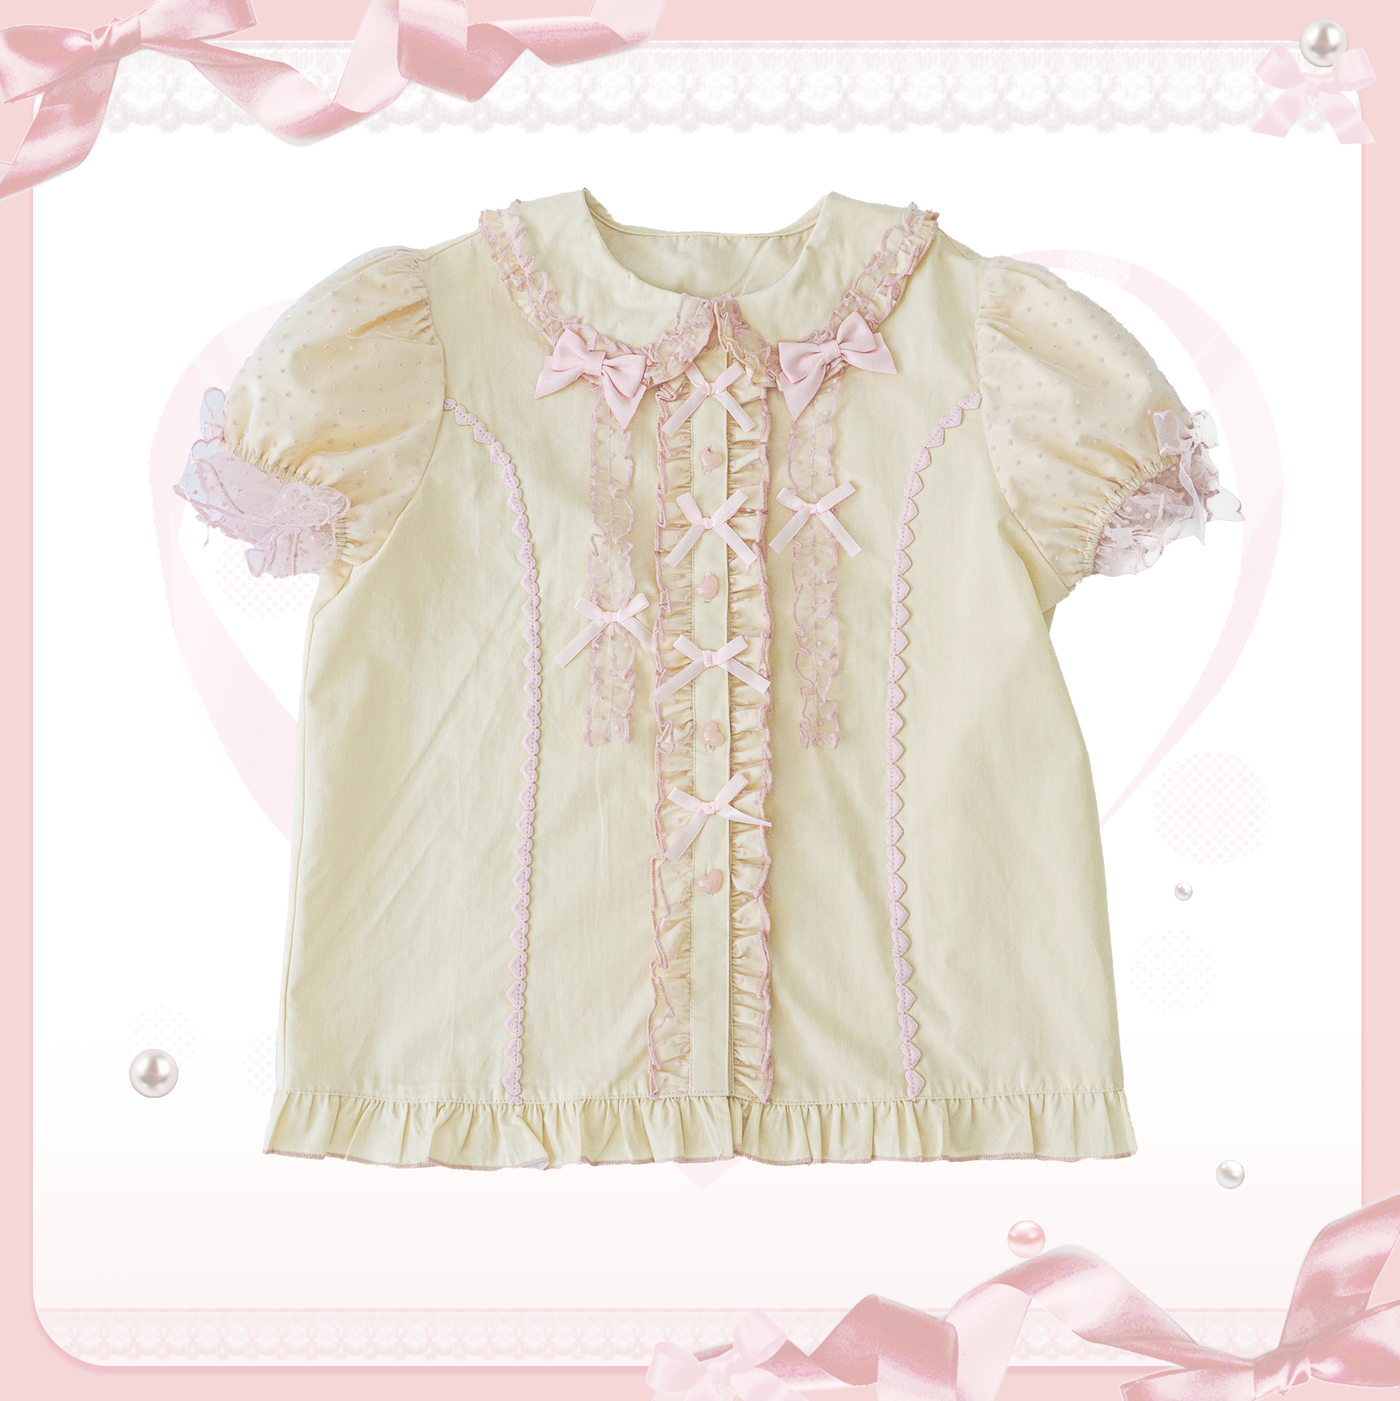 (Buy for me) The Seventh Doll~Sweet Doll Lolita Cotton Jumper Dress S yellow & pink blouse 